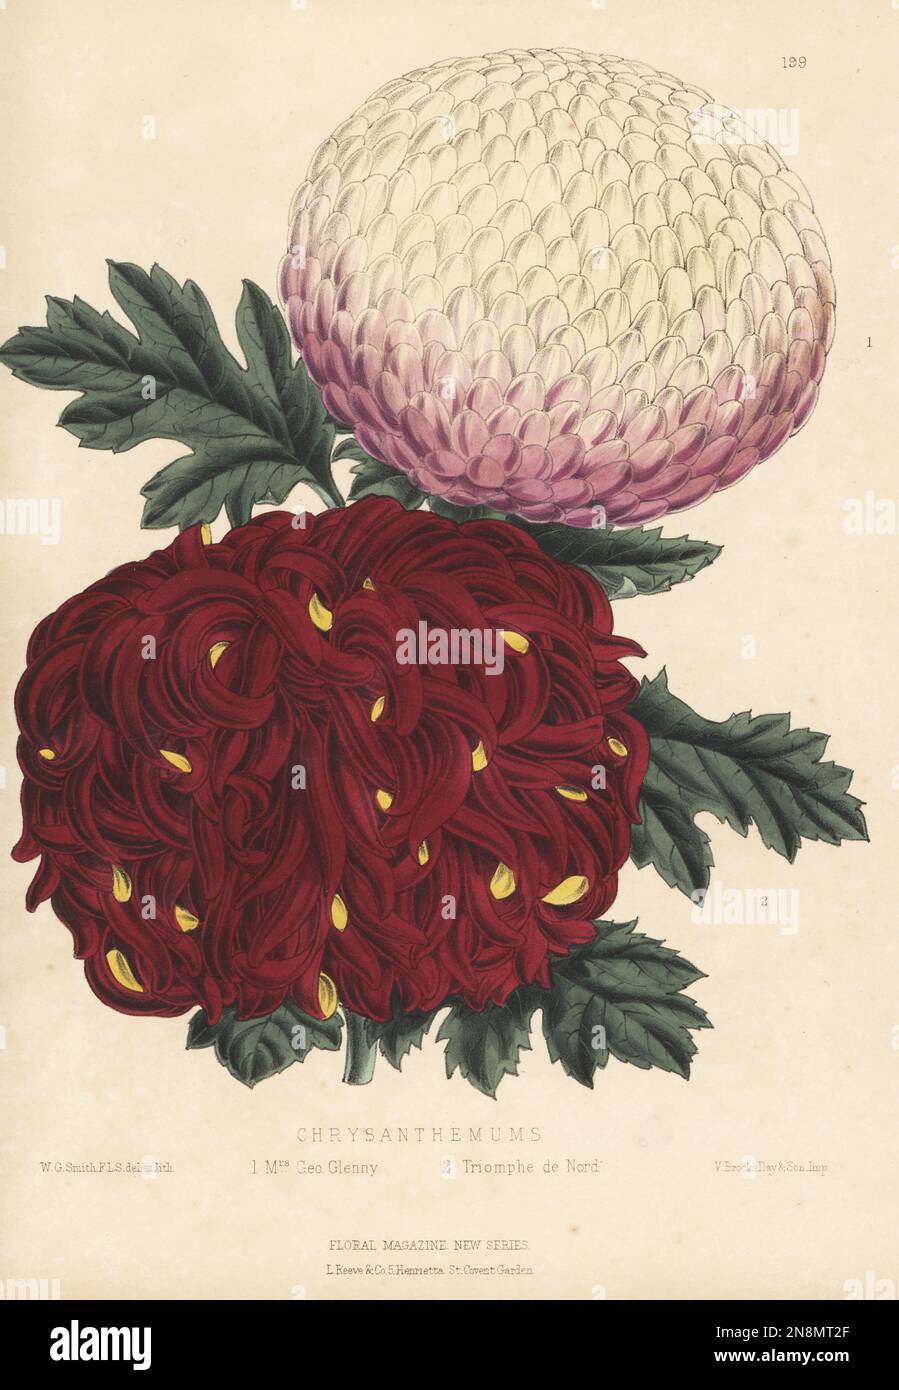 Chyrsanthemum cultivars, Mrs George Glenny, raised by H Cannell of Woolwich, and Triomphe de Nord, raised by Mr Turner of Slough. Sold by James Veitch and Sons nursery, Chelsea. Handcolored botanical illustration drawn and lithographed by Worthington George Smith from Henry Honywood Dombrain's Floral Magazine, New Series, Volume 5, L. Reeve, London, 1876. Lithograph printed by Vincent Brooks, Day & Son. Stock Photo